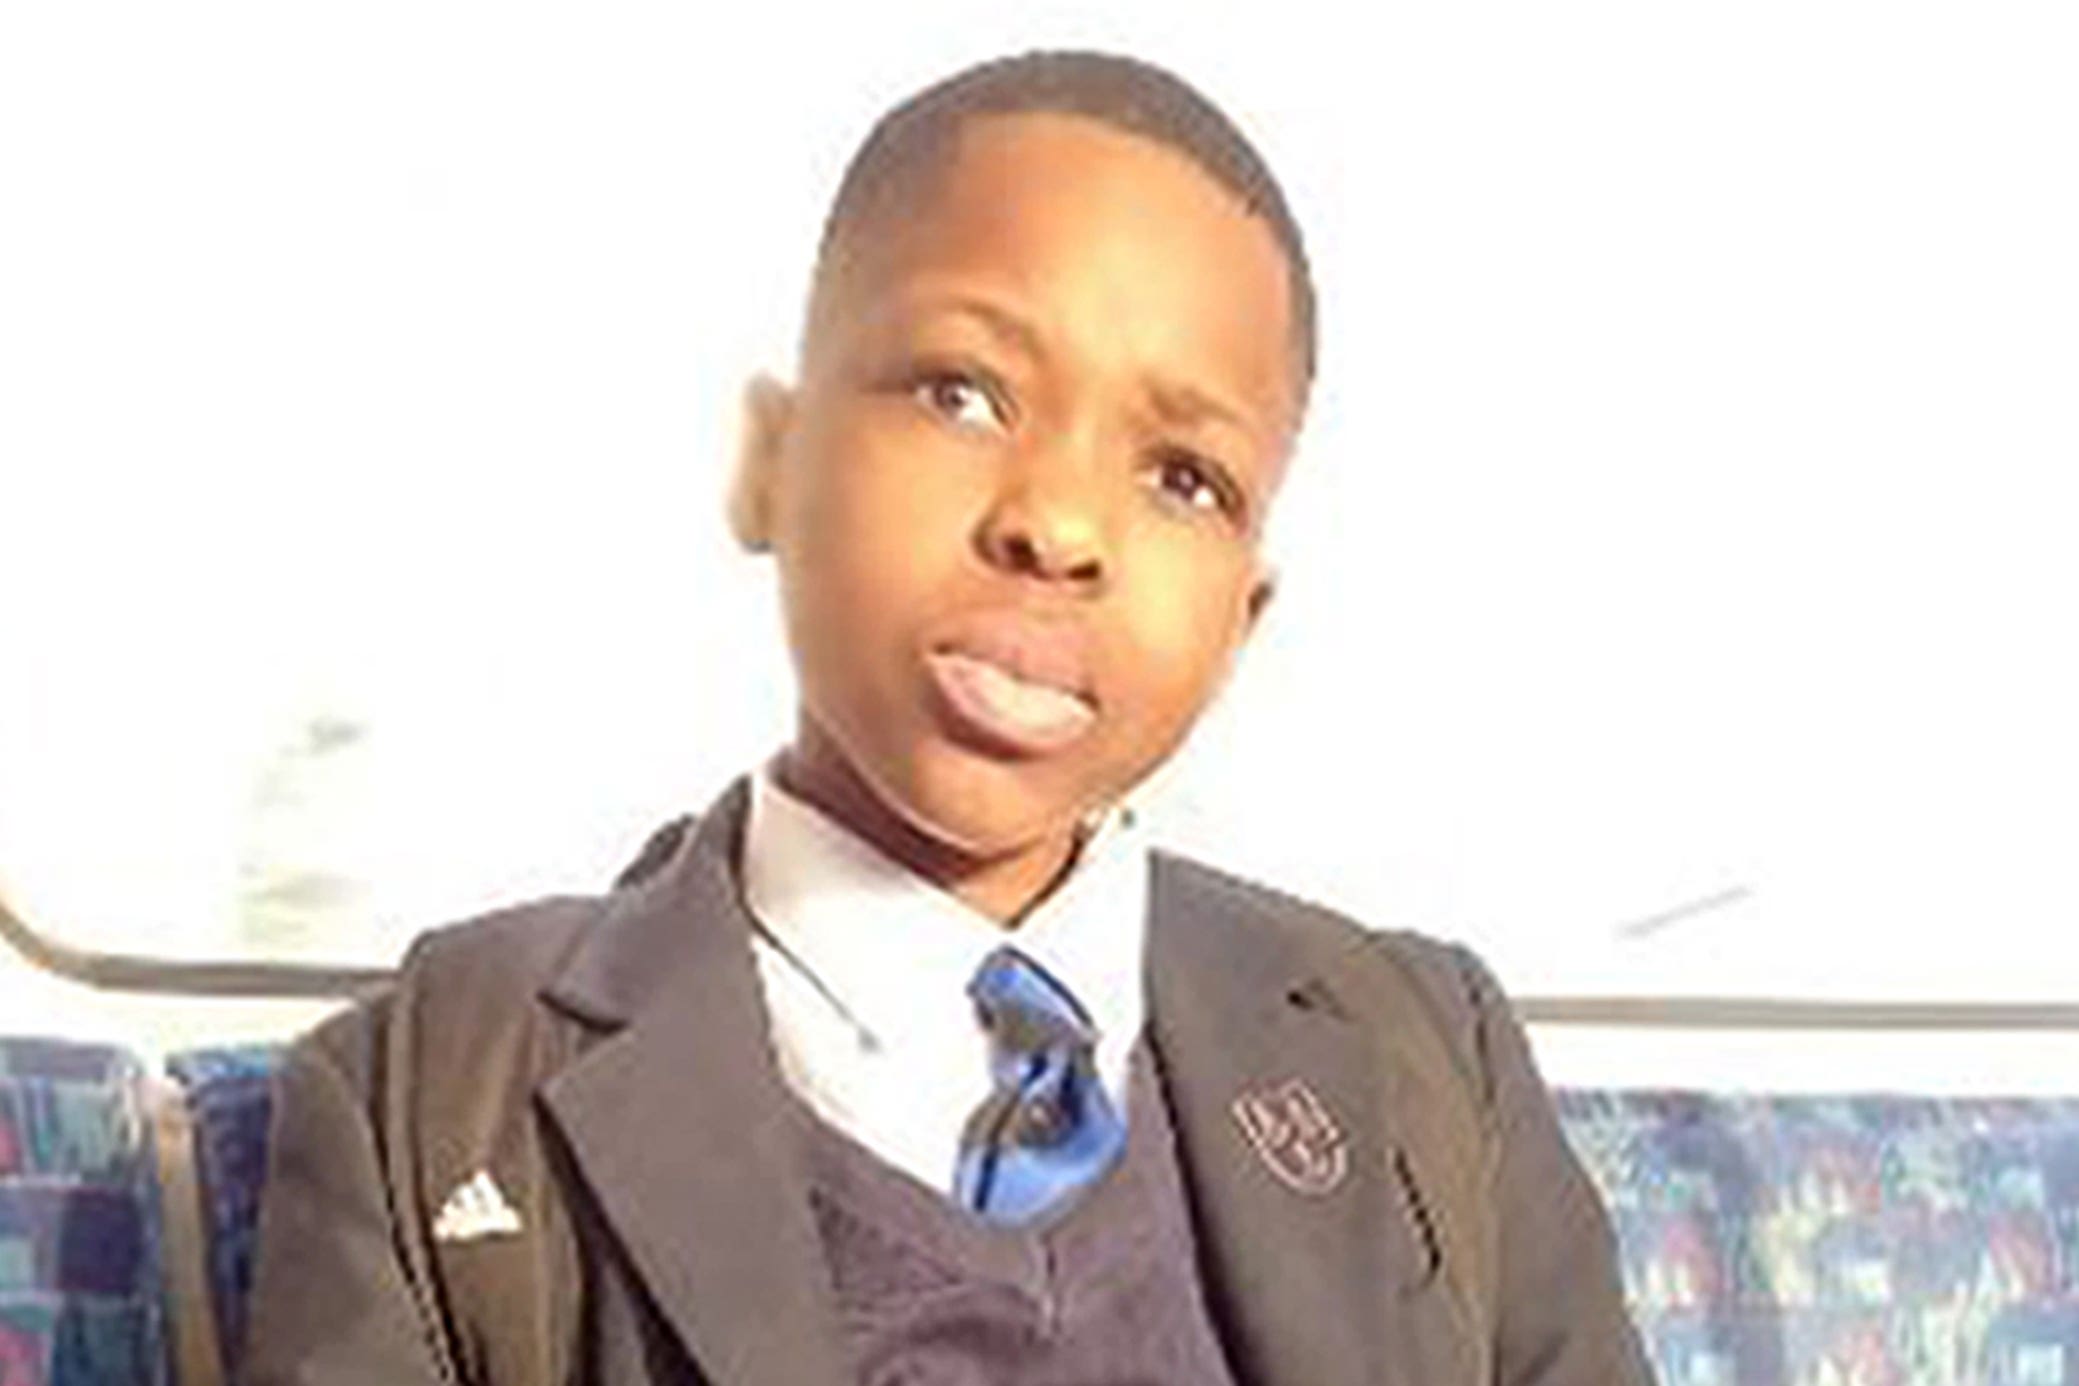 Daniel Anjorin was killed as he was walking to school on Tuesday